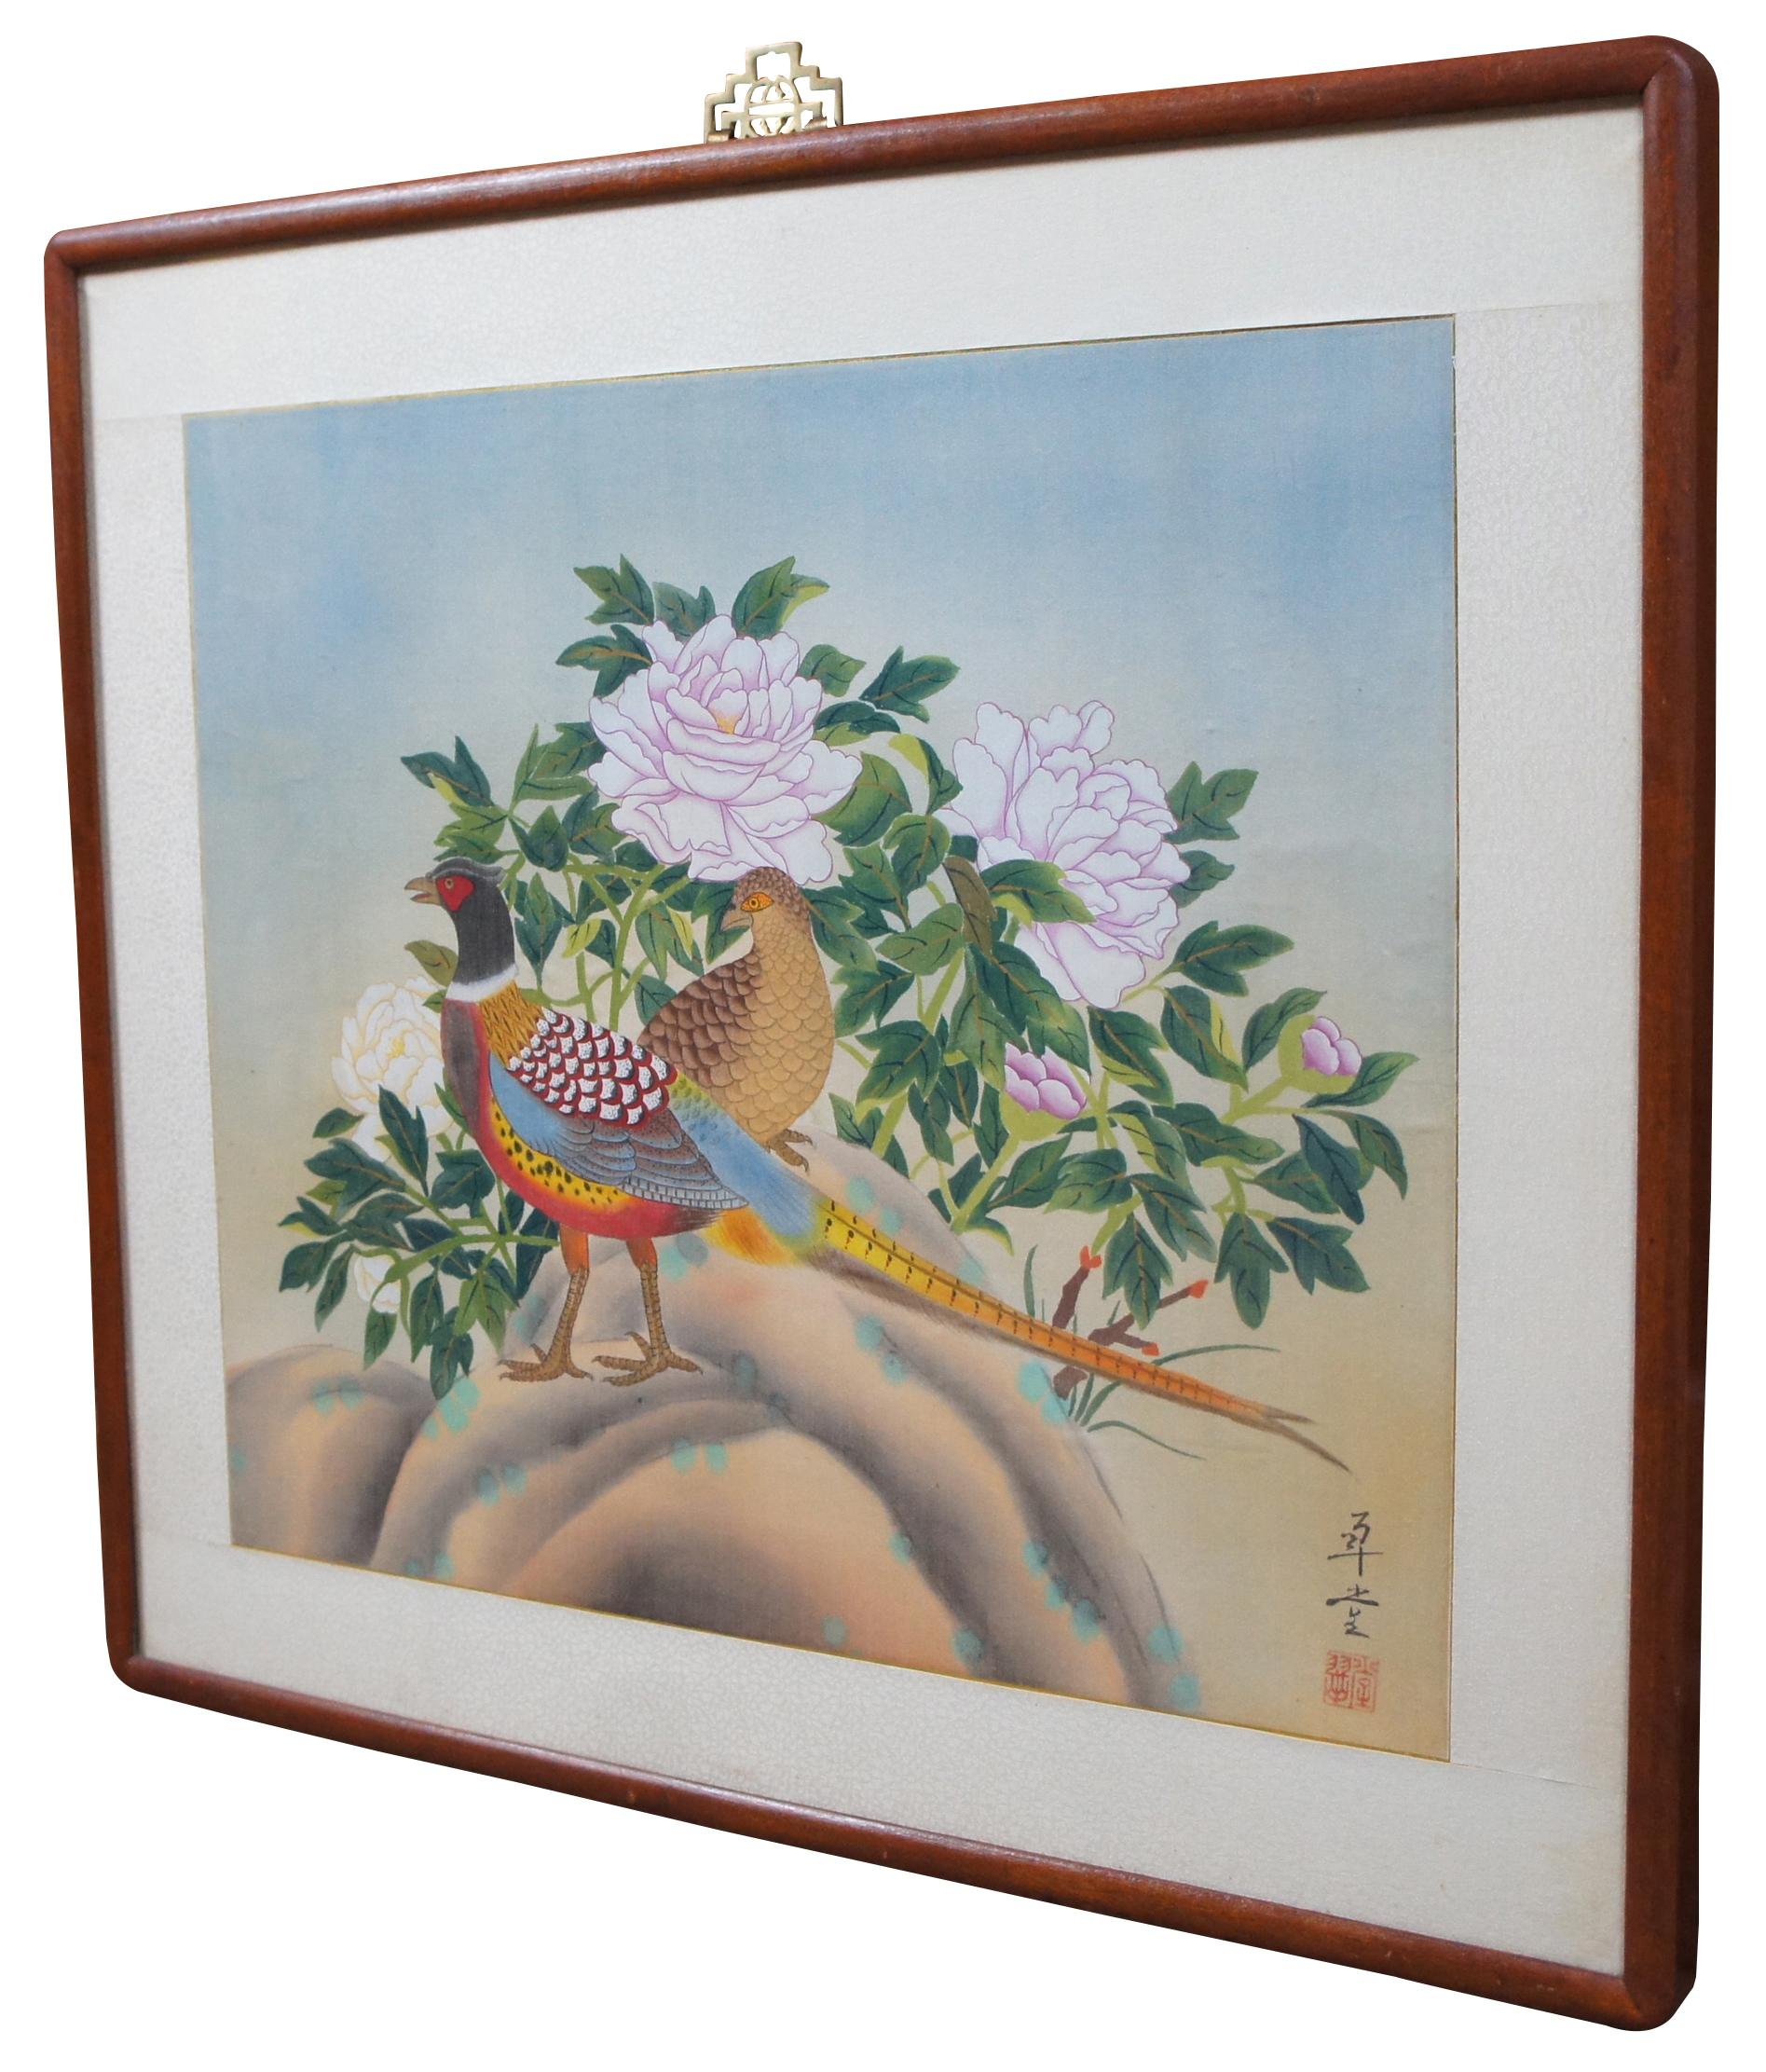 1979 Cui Tang Chiense / Korean painting on silk showing brightly colored male and female pheasants in front of a bush of pink and white peonies.

1 ?? huà tí Title of the Art 
2 ?? (Korean) N/A 1. gold thread 2. marital relationship 
3 ?????? ?